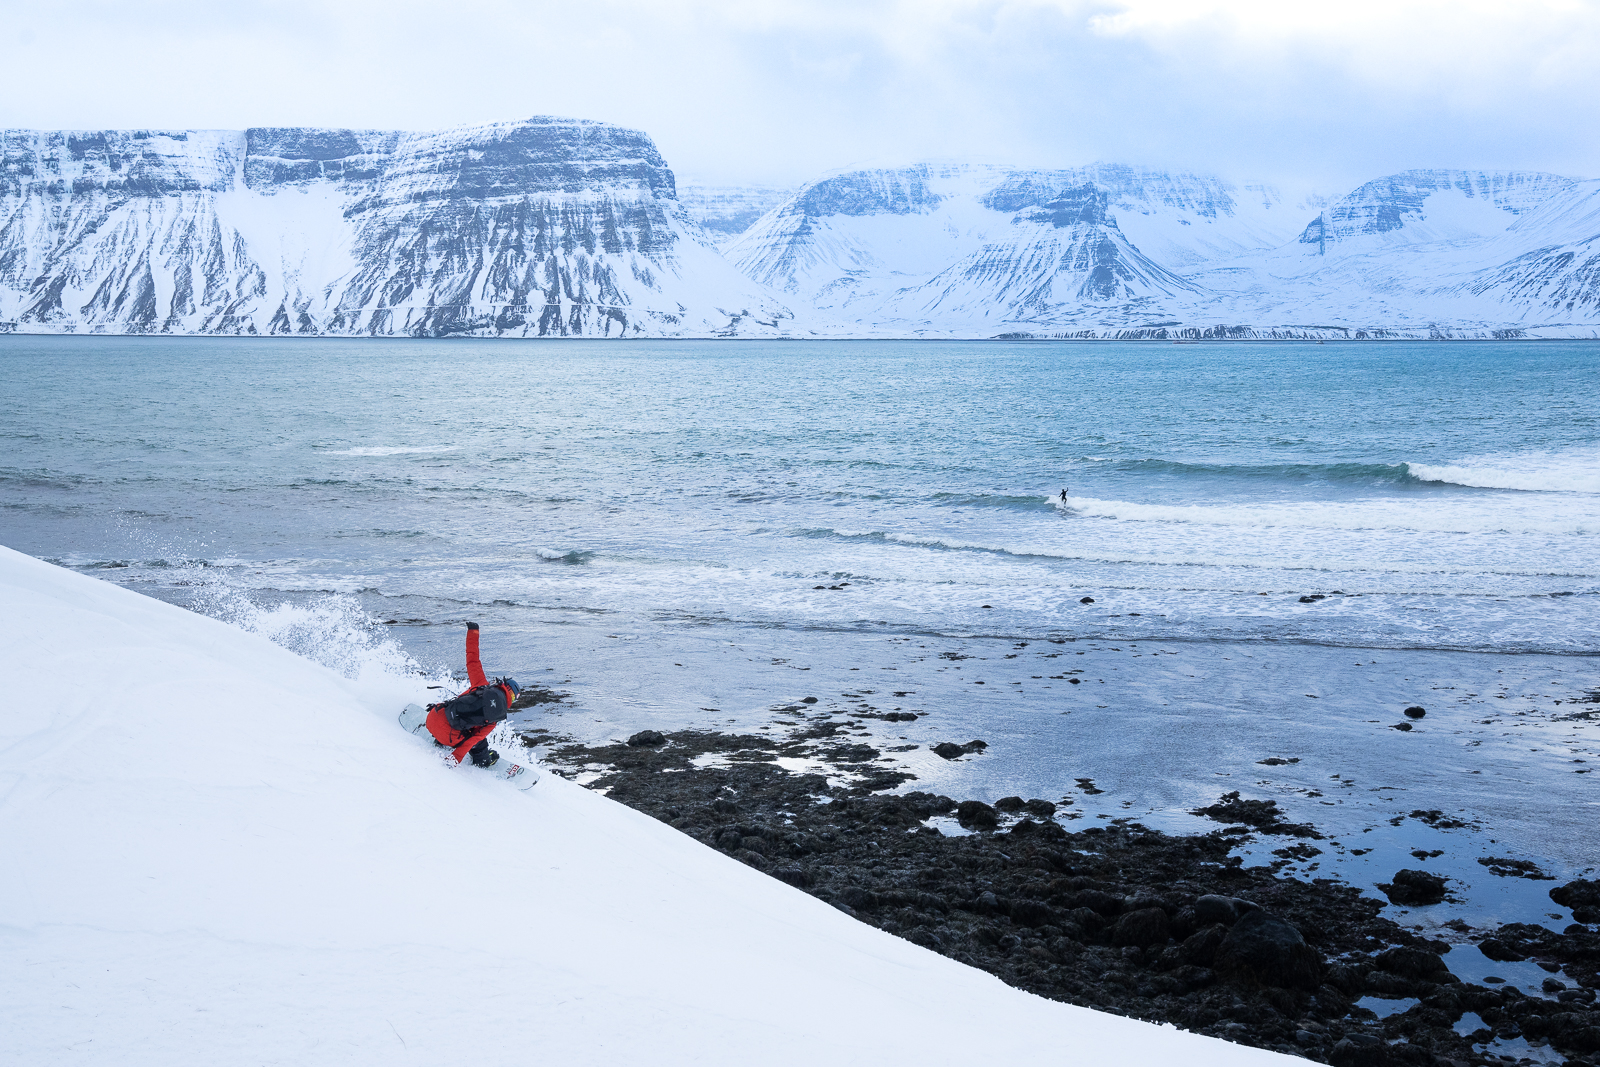 Elena Hight snowboards while Peter Devries surfs in the background. Westfjords, Iceland.